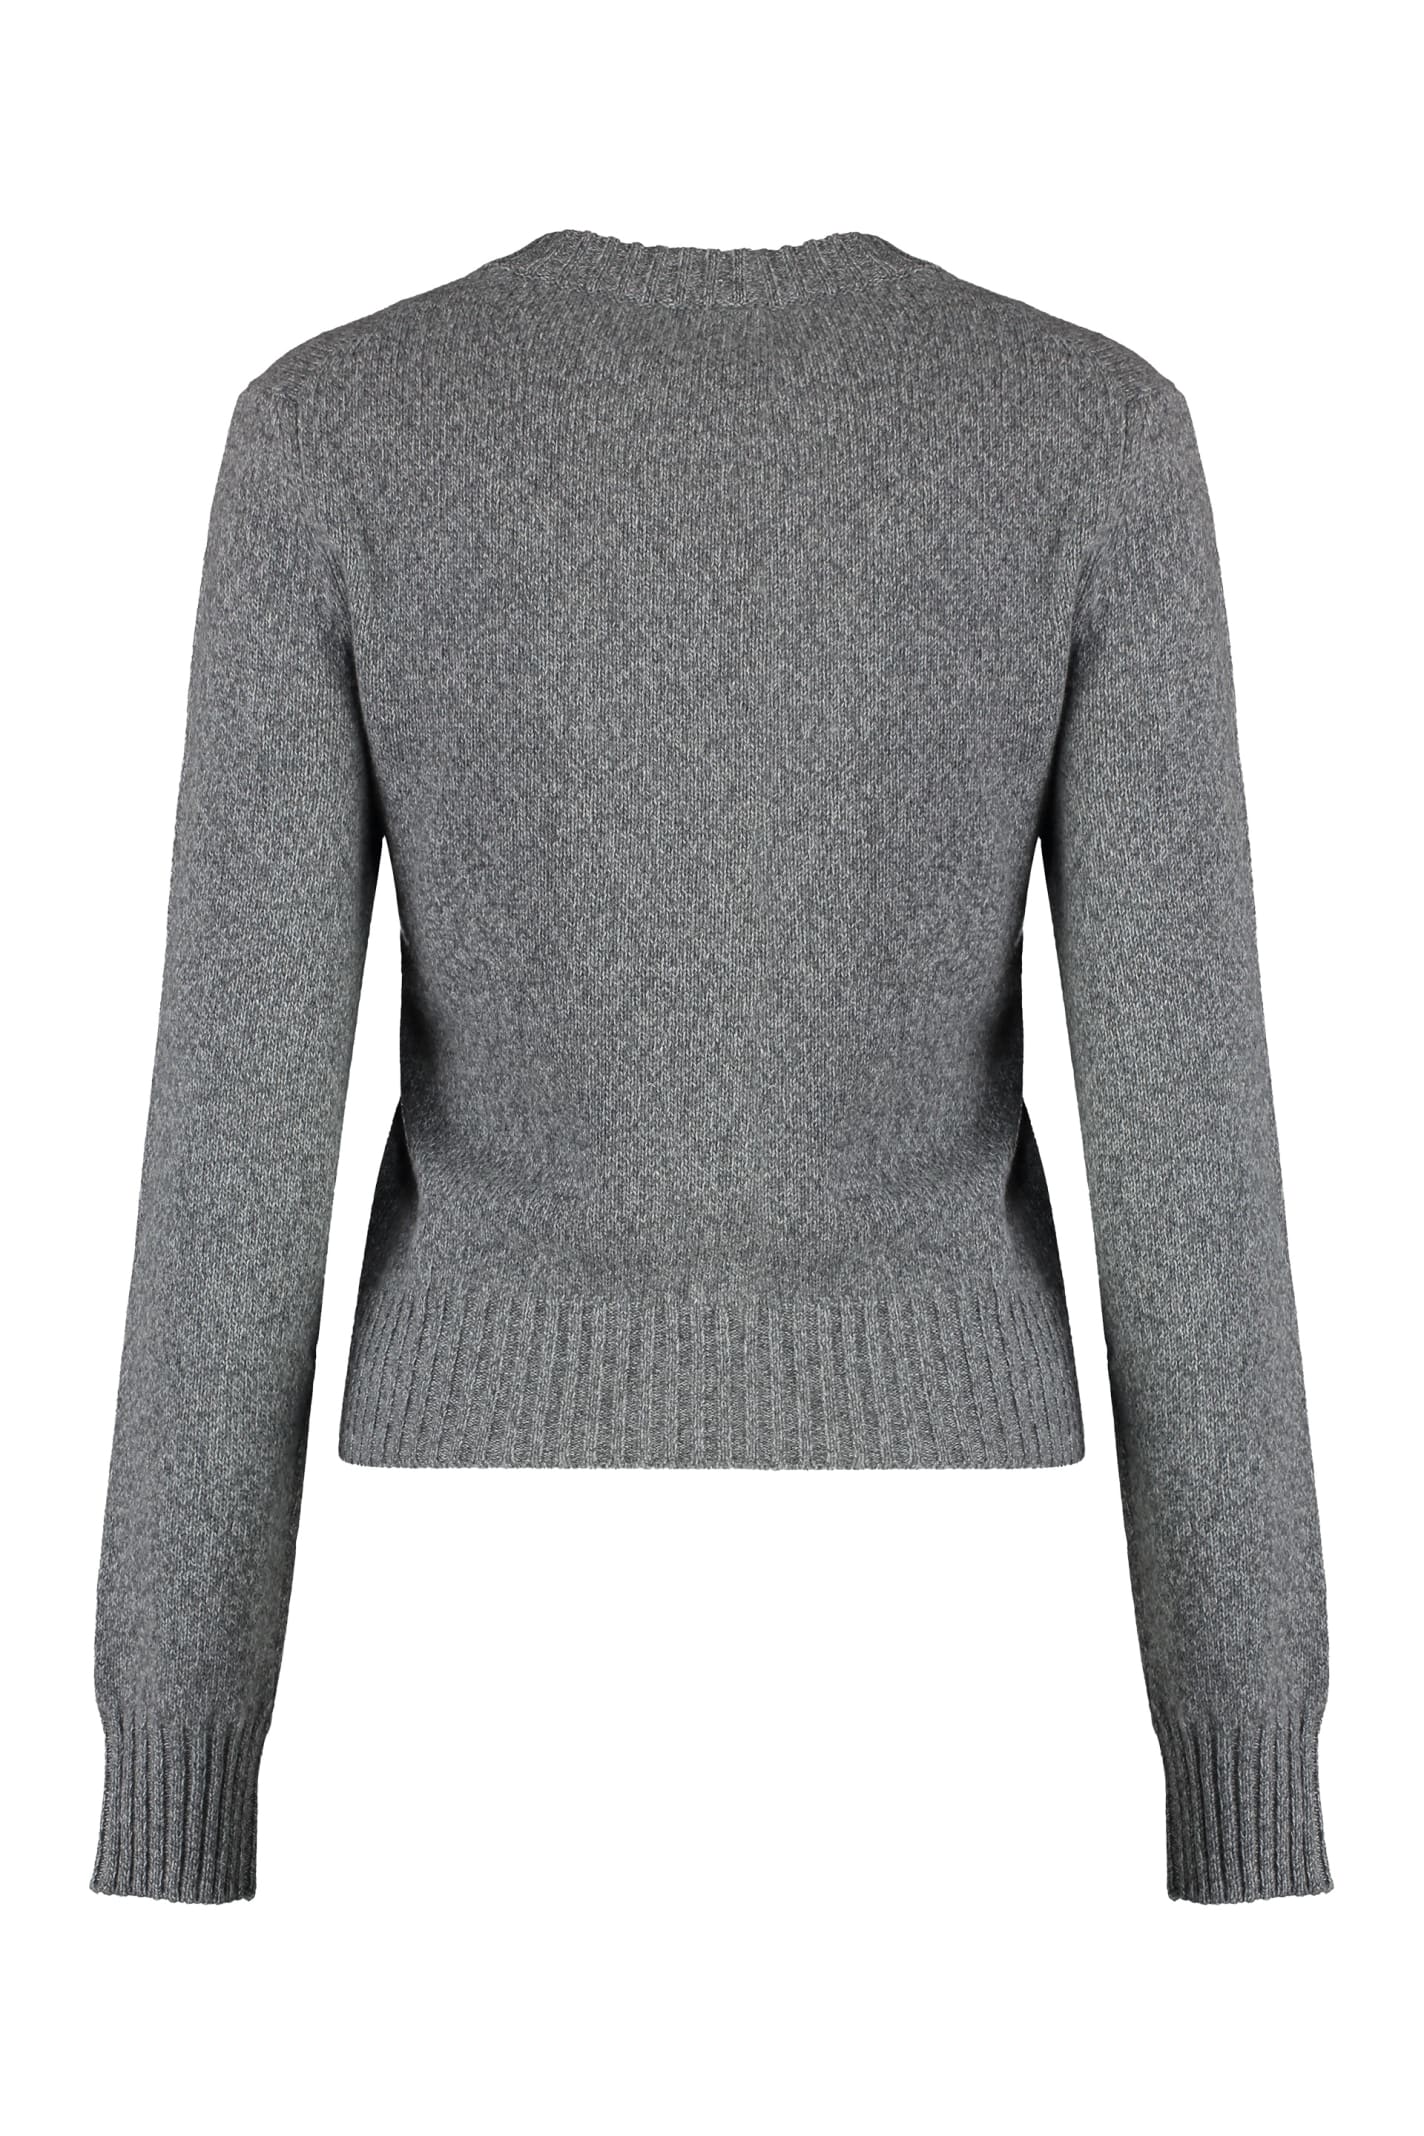 Shop Ami Alexandre Mattiussi Wool And Cashmere Sweater In Grey